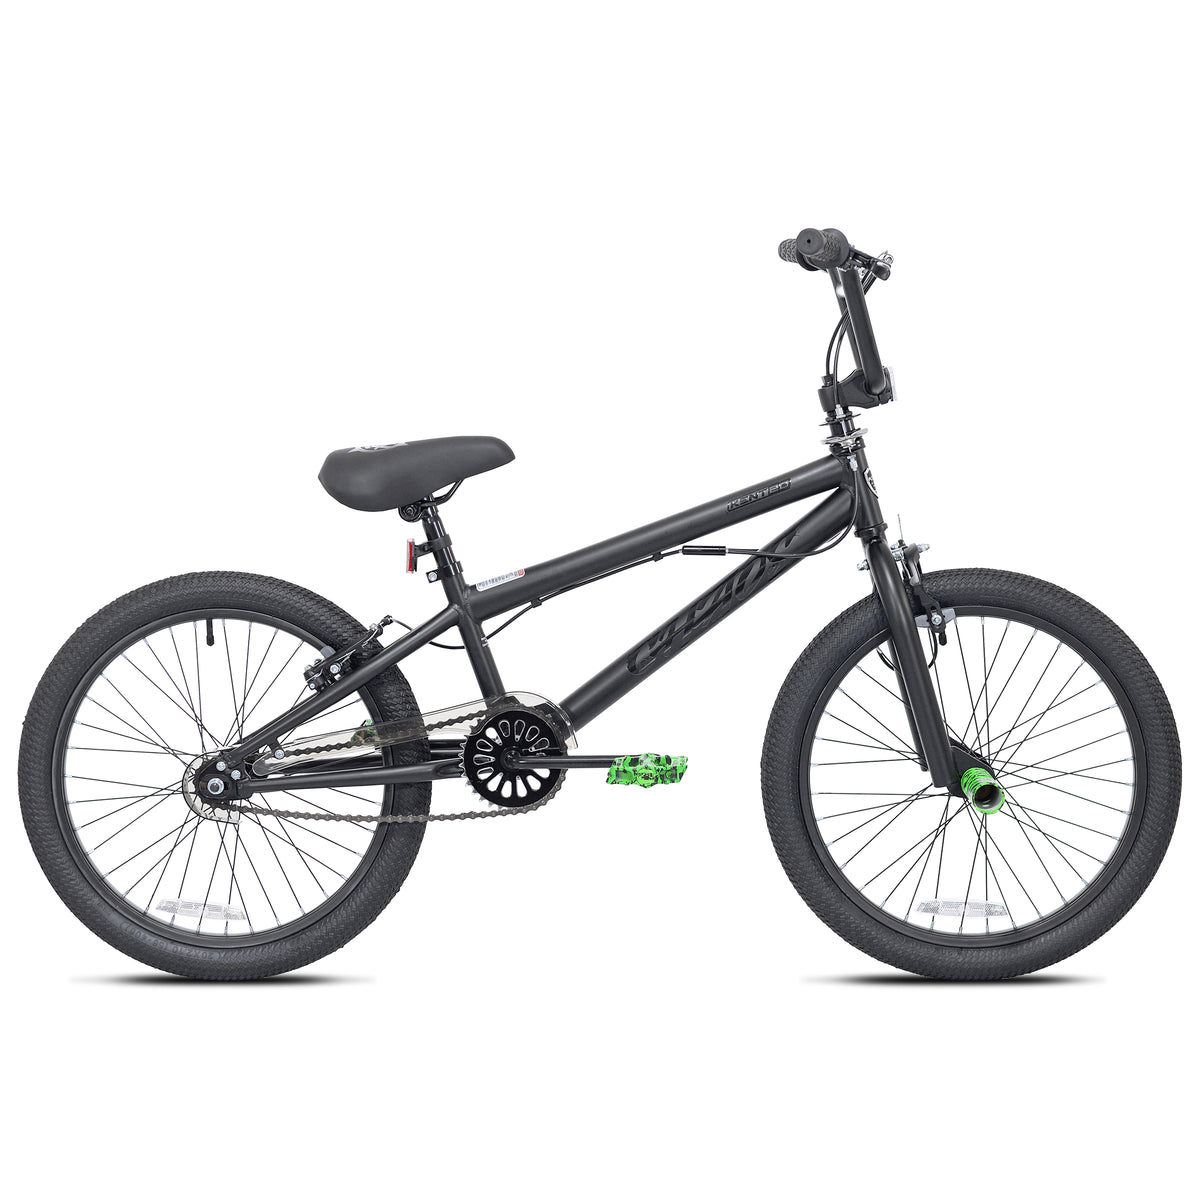 20" Kent Chaos | Bike for Kids Ages 7-13